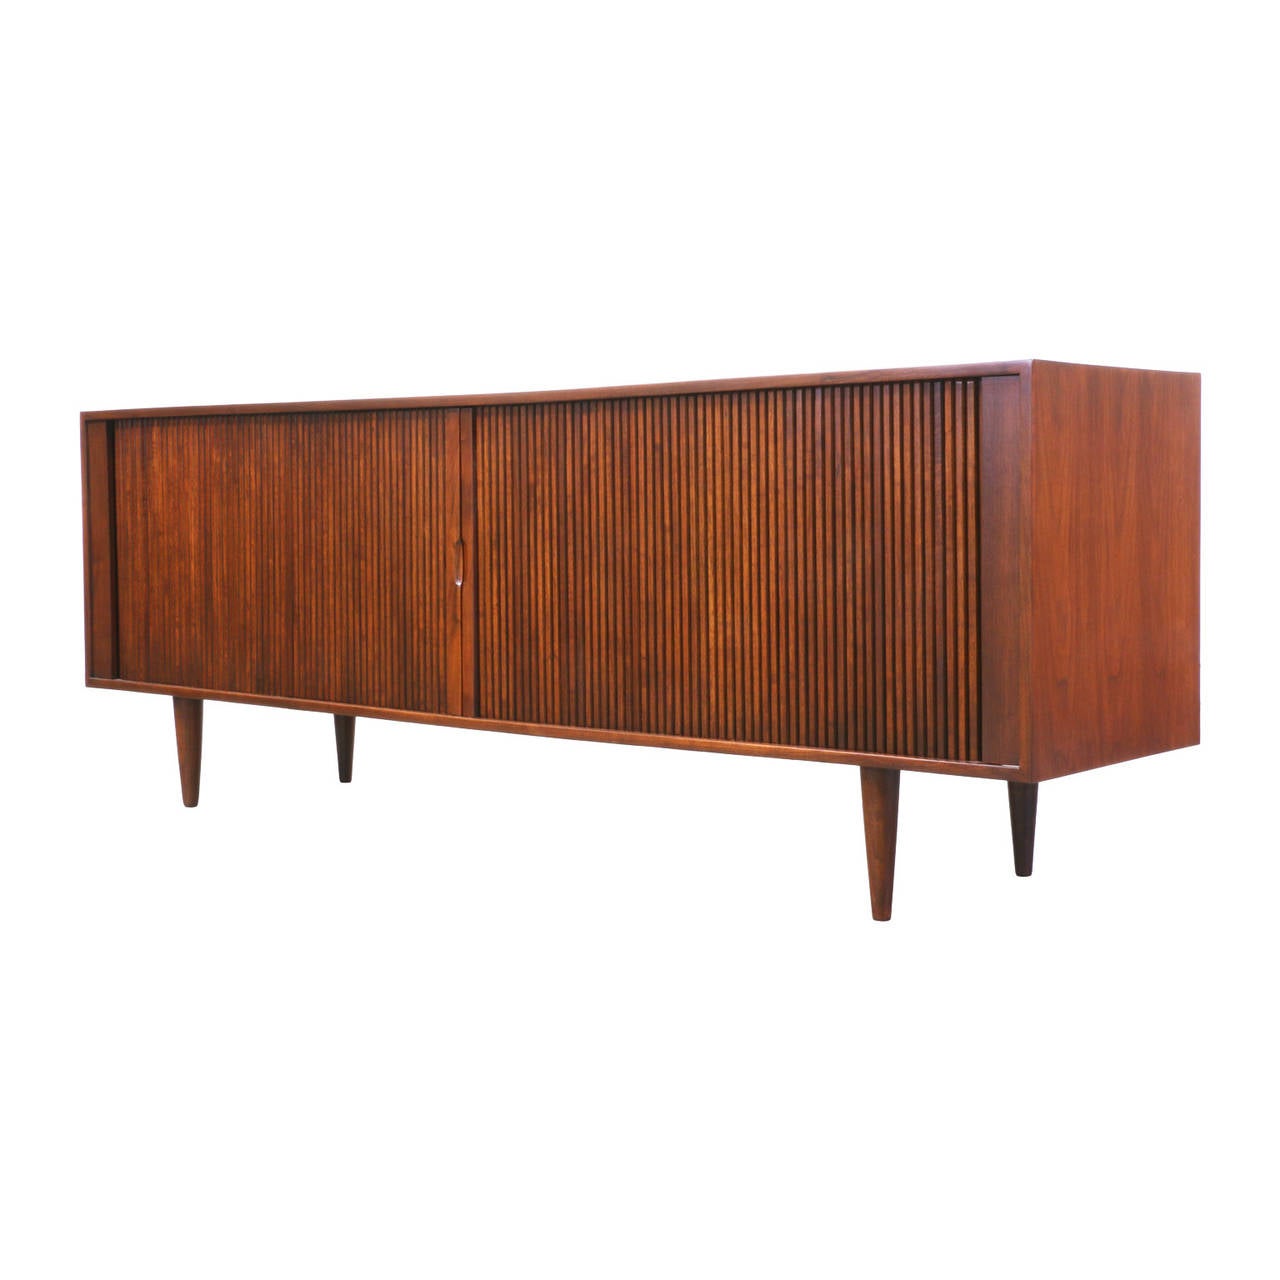 Designer: Unknown
Manufacturer: Unknown
Period/Style: Mid Century Modern
Country: United States
Date: 1950’s

Dimensions: 28″H x 78″L x 18″W
Materials: Walnut
Condition: Excellent – Newly Refinished
Number of Items: 1
ID Number: